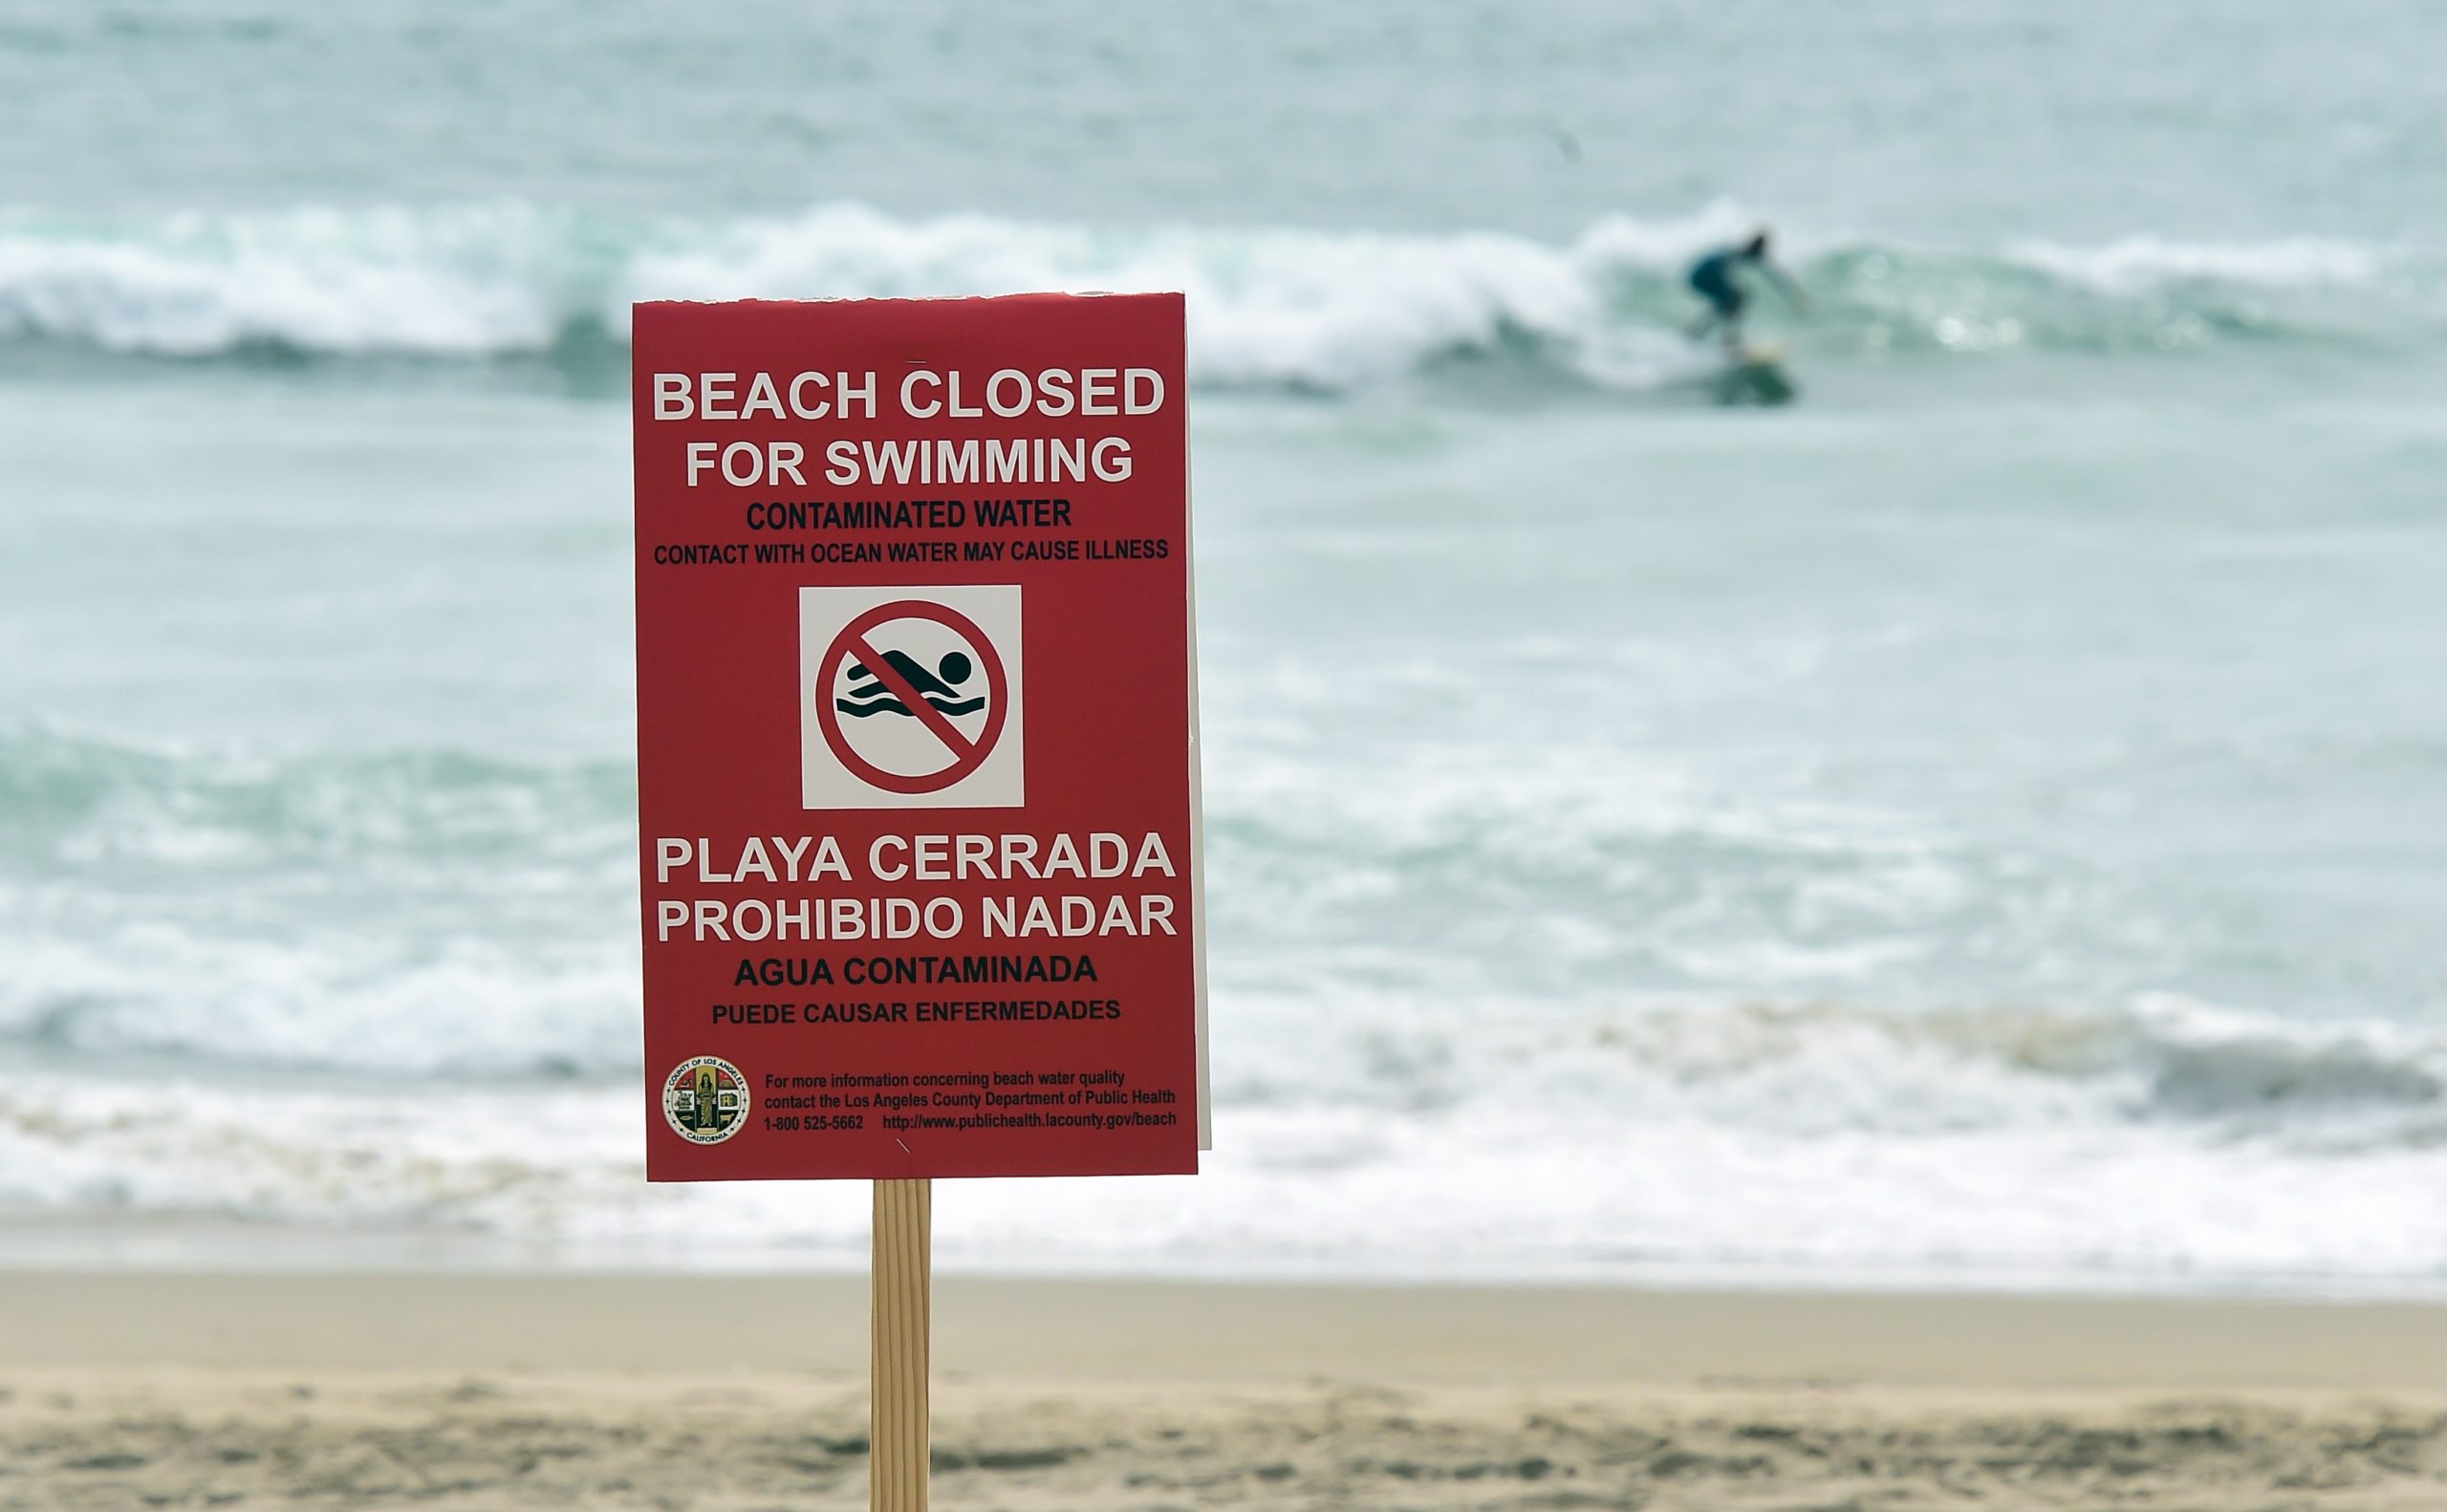 Alert! Hollywood Beach waters polluted for swimmers